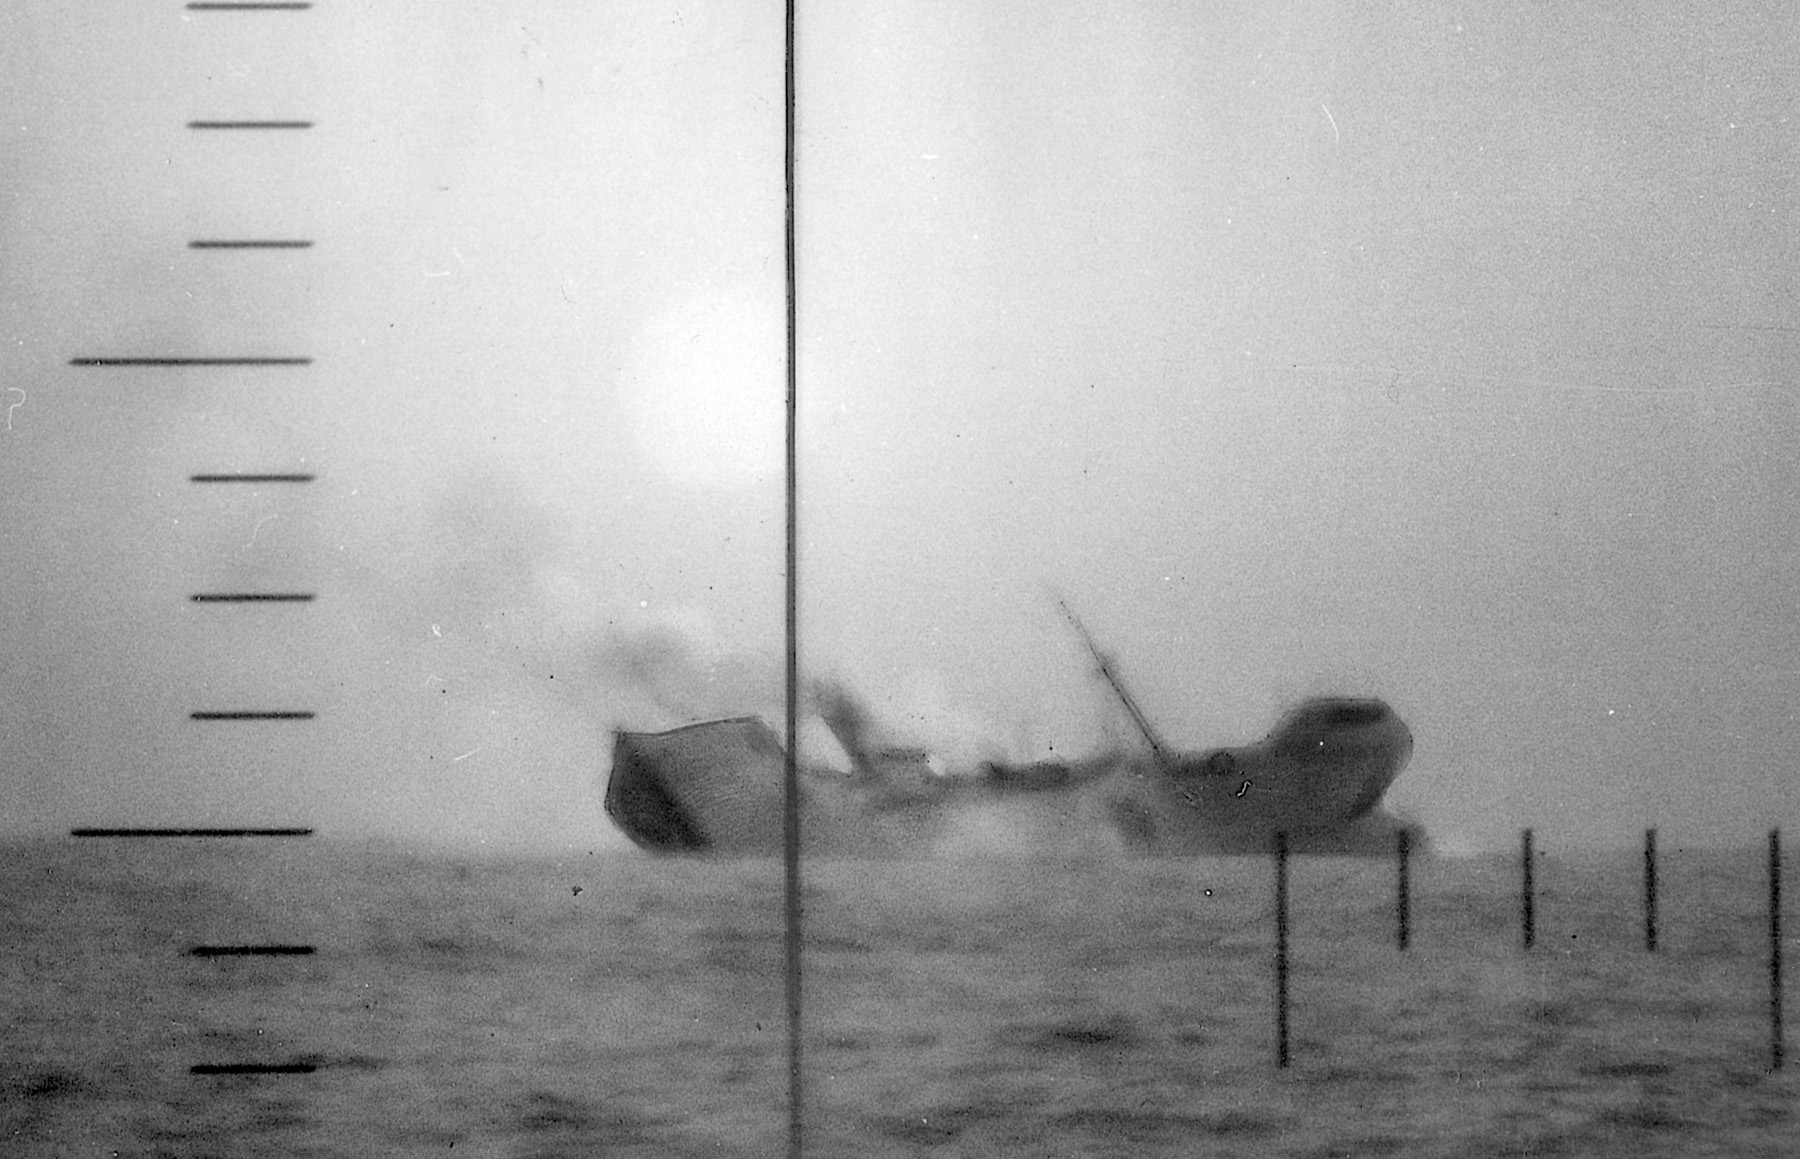 In a periscope view from the American submarine that has torpedoed it, a Japanese freighter breaks in half before sinking.